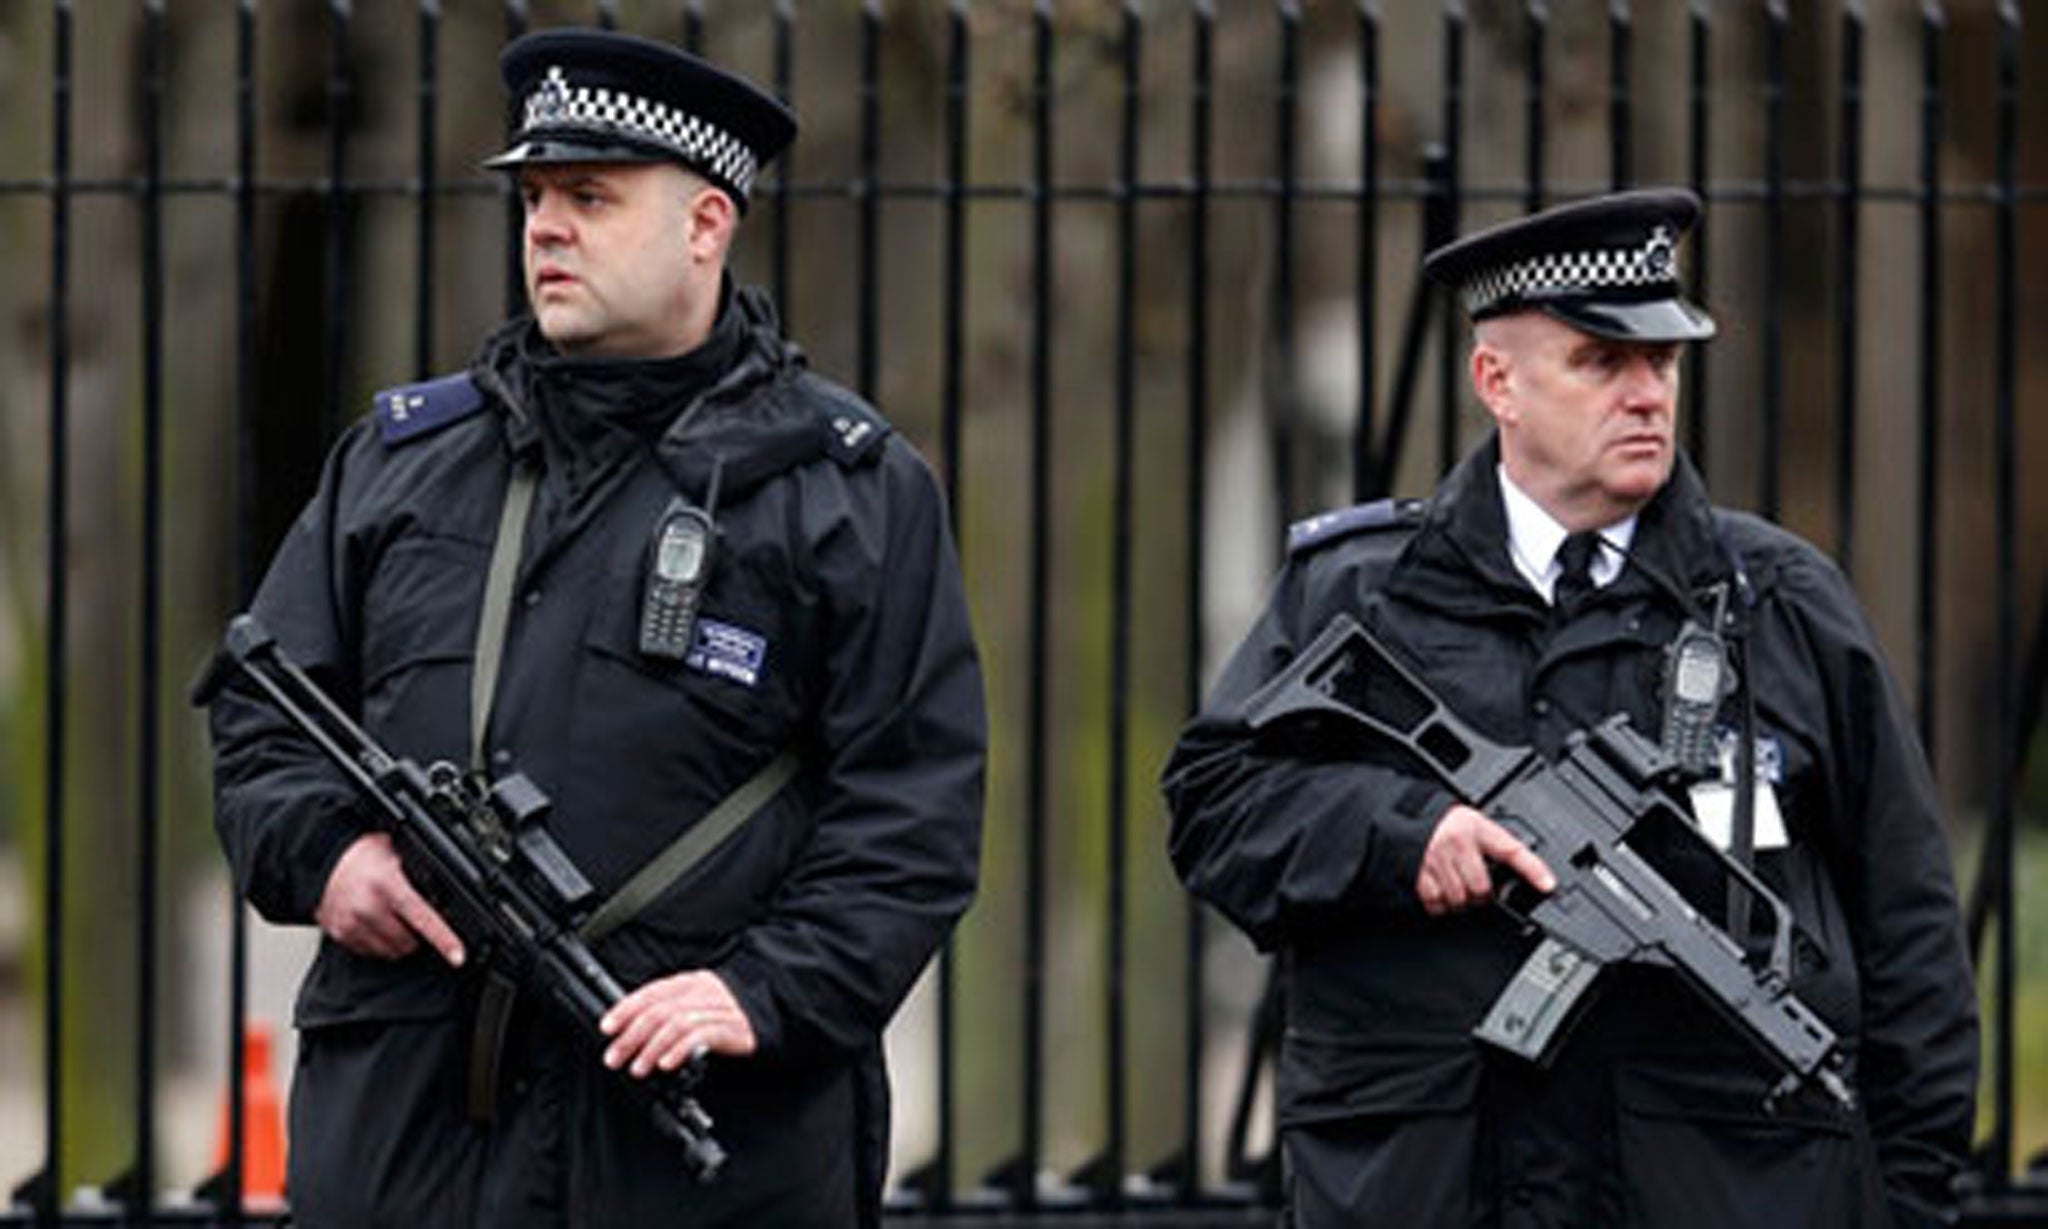 Armed police in central London before Margaret Thatcher's funeral